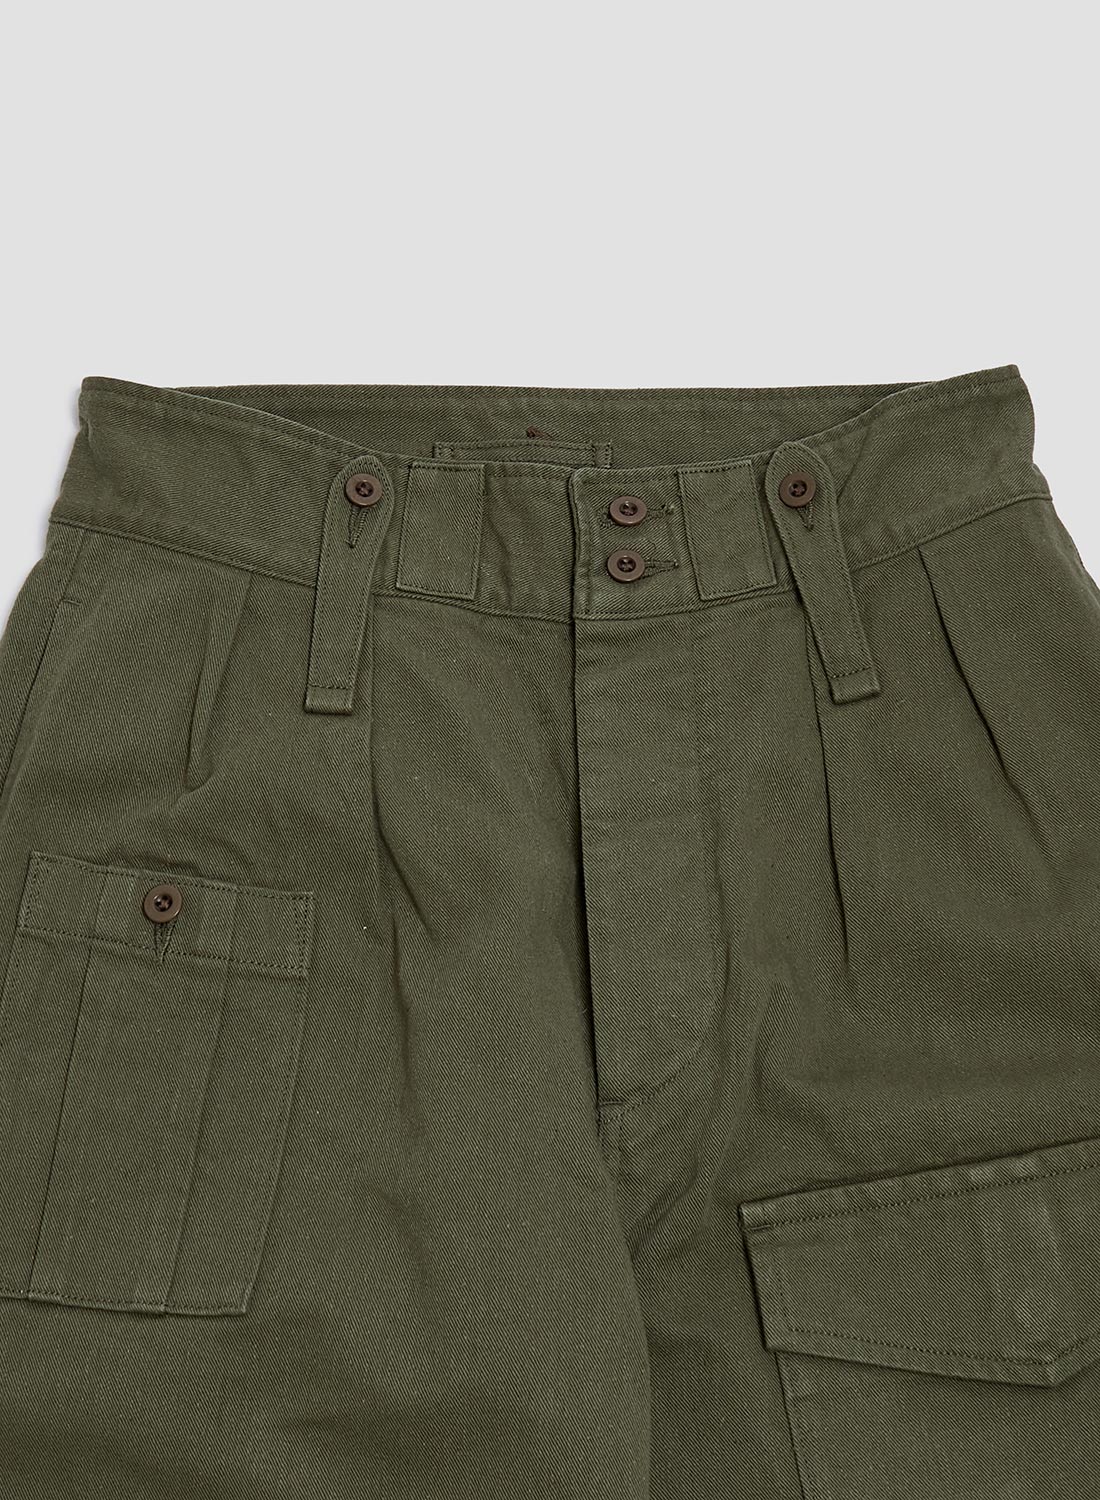 British Army Pant Vintage Twill in Green – Nigel Cabourn